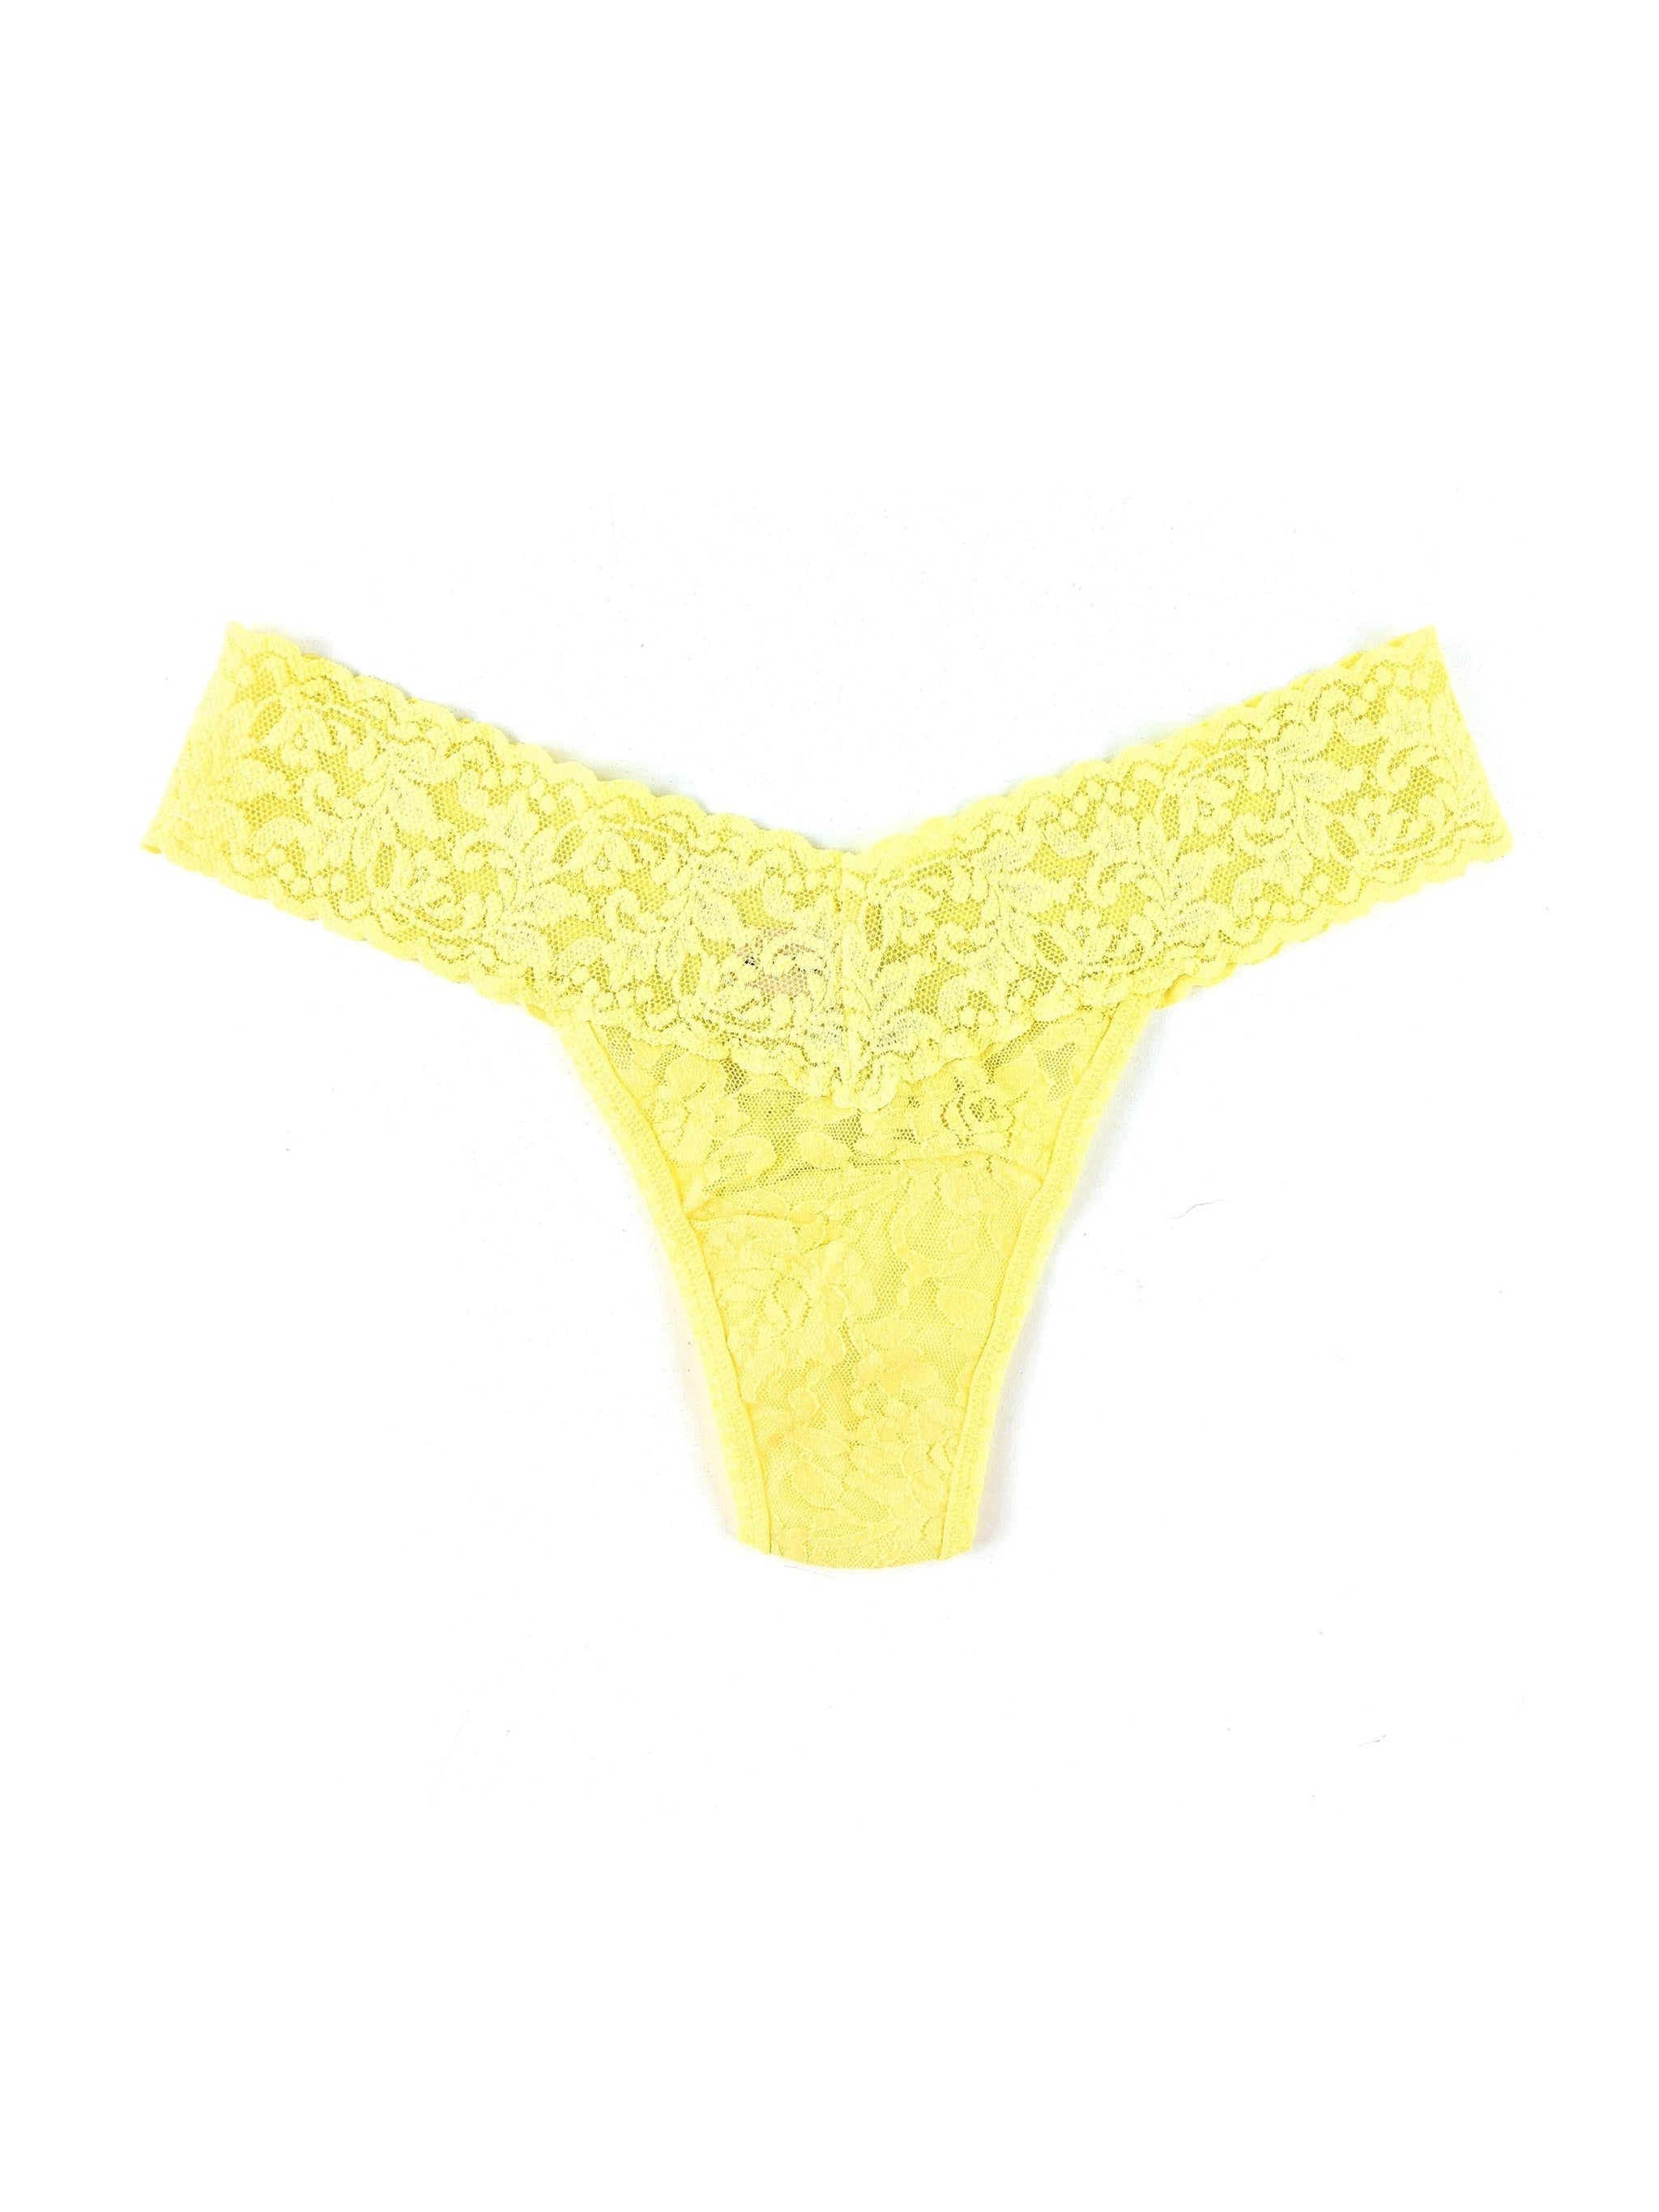 Petite Size Signature Lace Low Rise Thong Limoncello Yellow